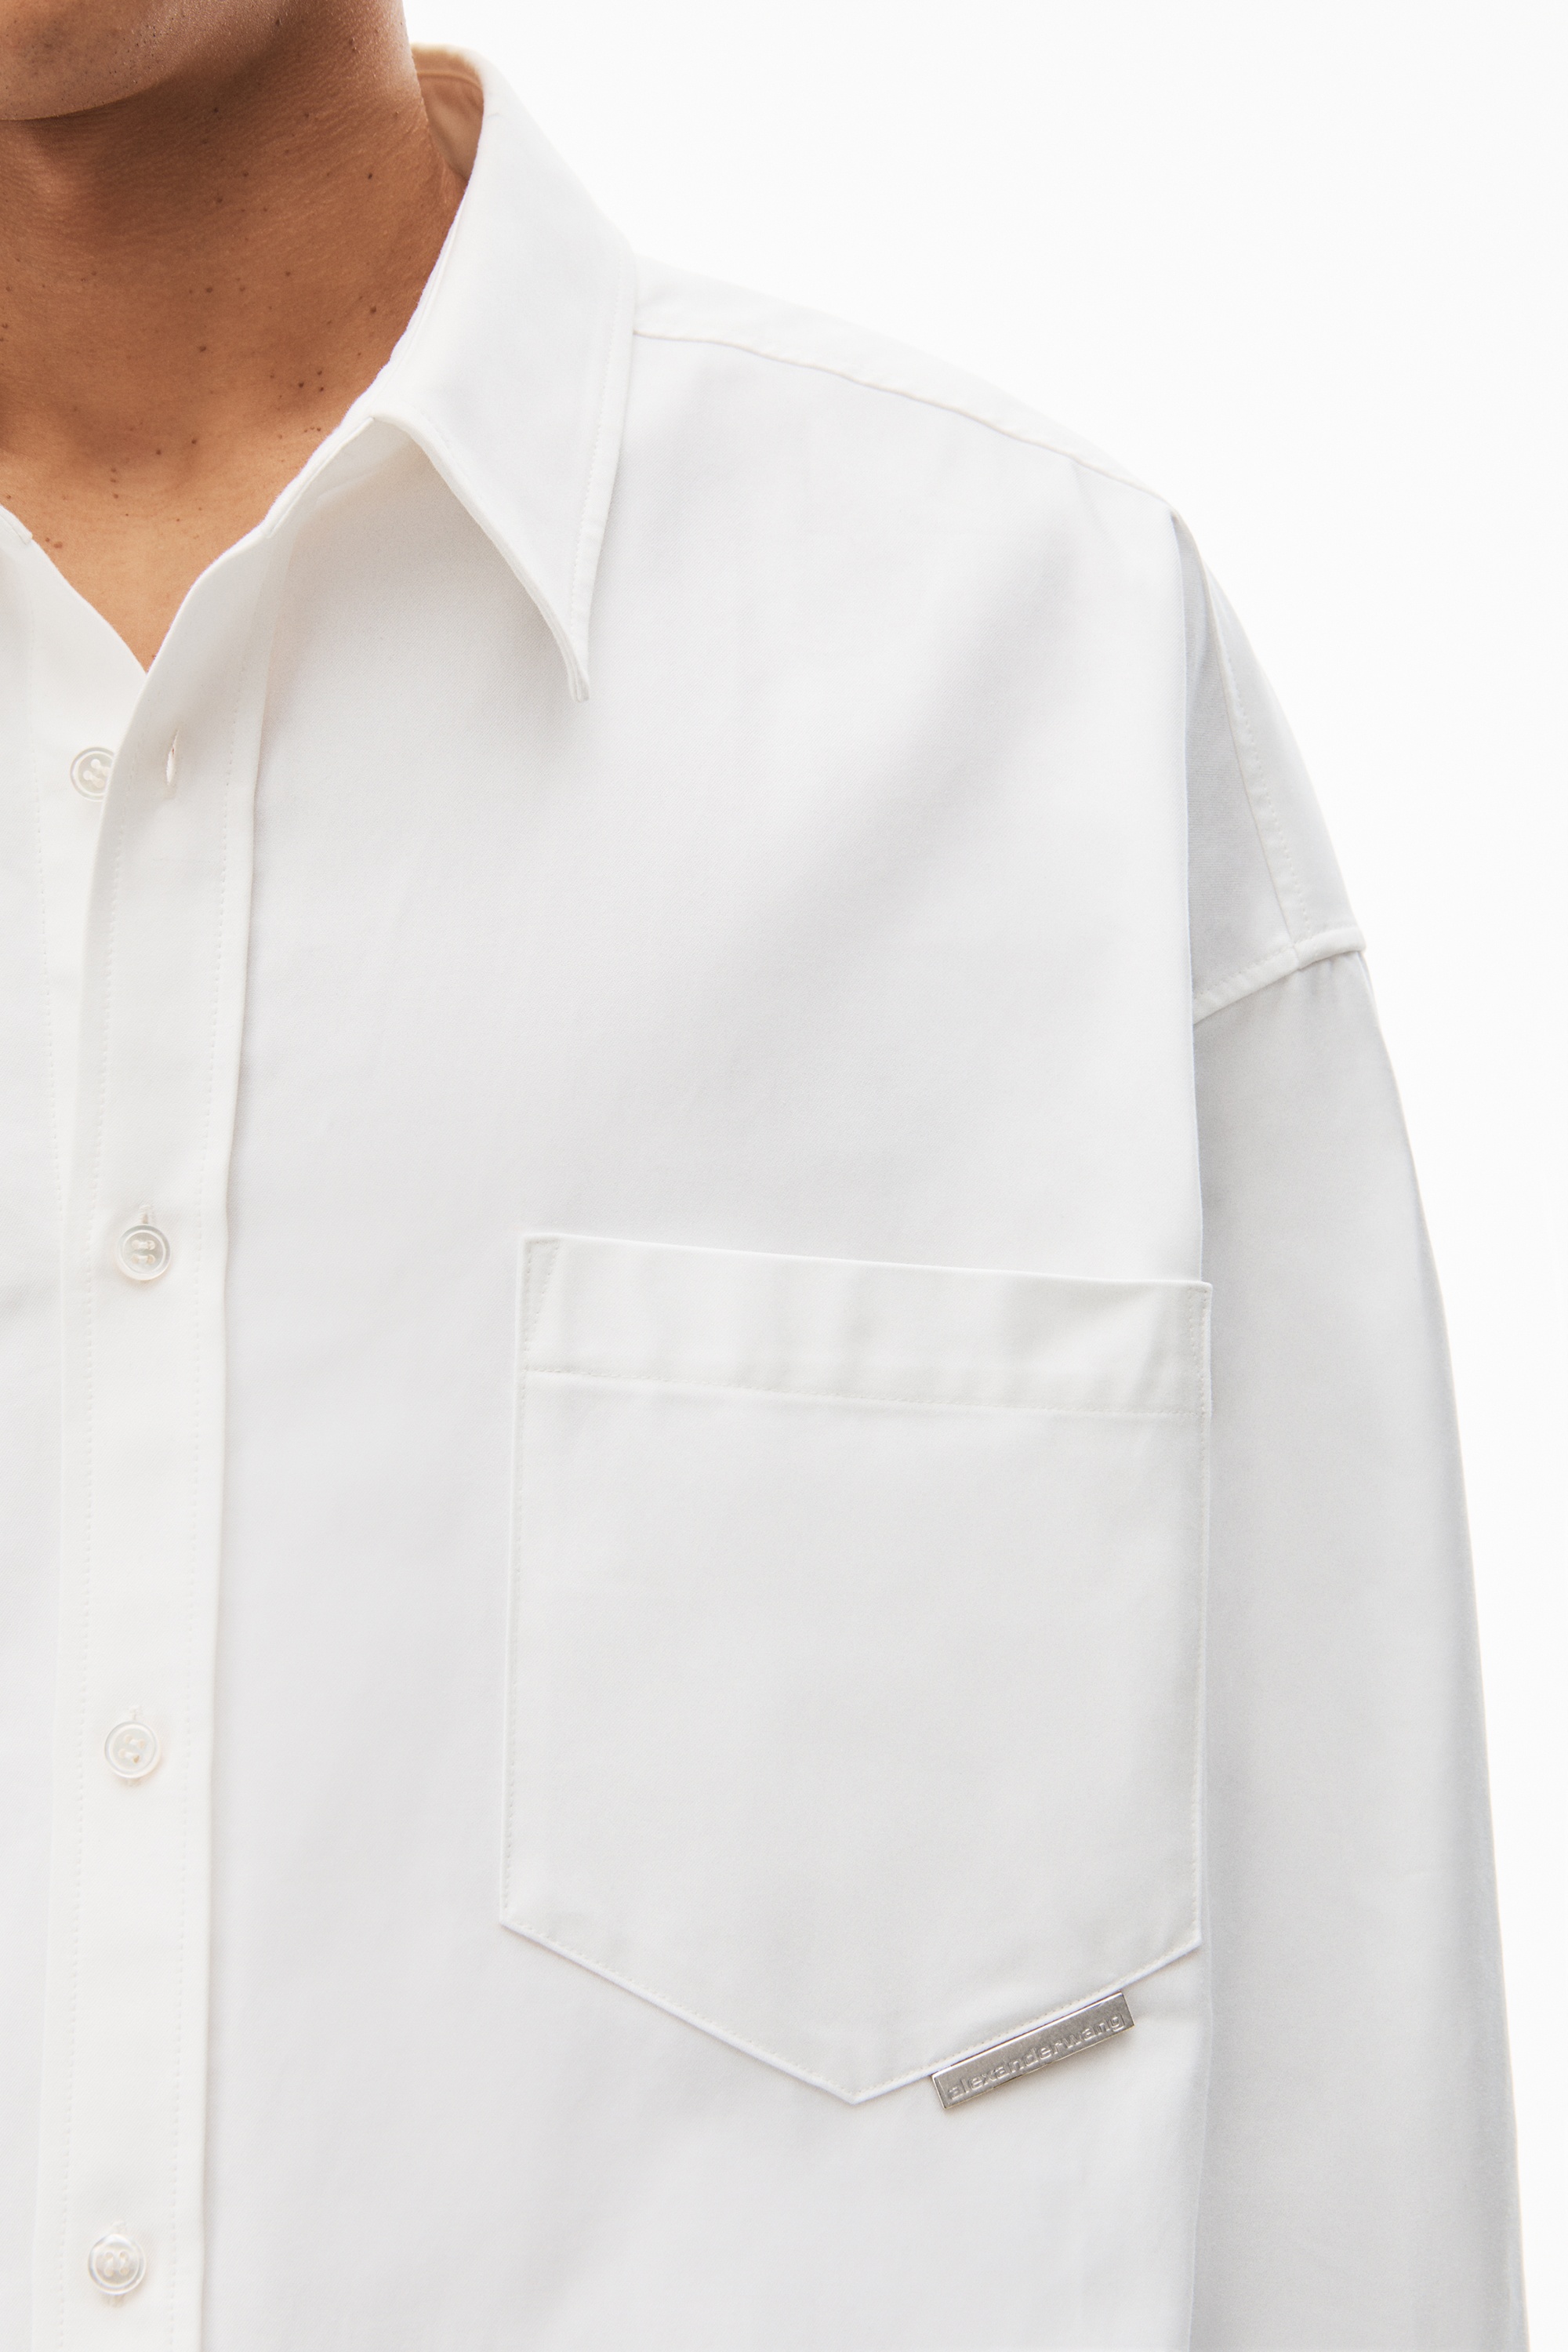 OVERSIZED BUTTON DOWN IN COTTON SHIRTING - 4